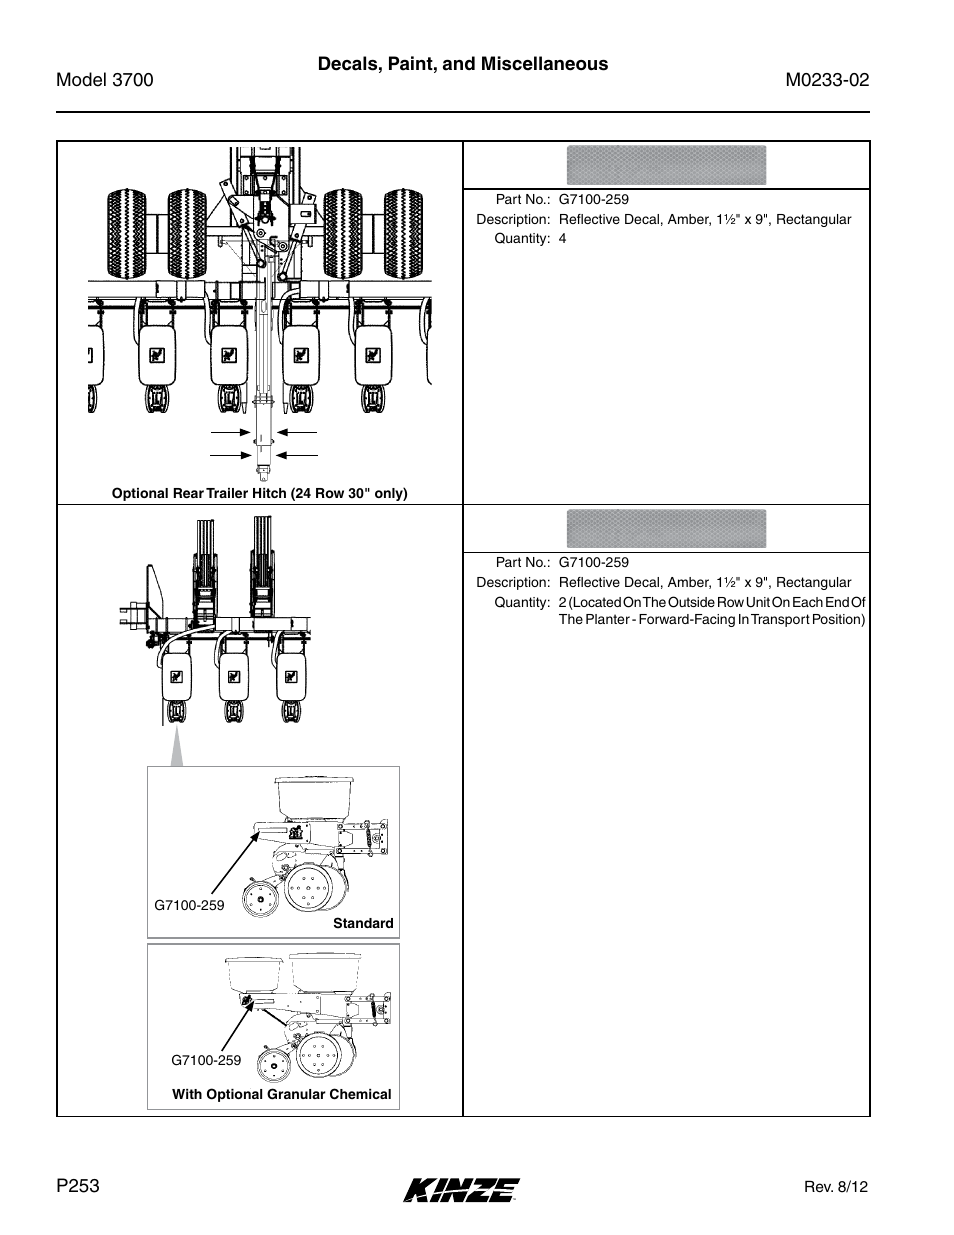 Decals, paint, and miscellaneous | Kinze 3700 Front Folding Planter Rev. 6/14 User Manual | Page 256 / 284